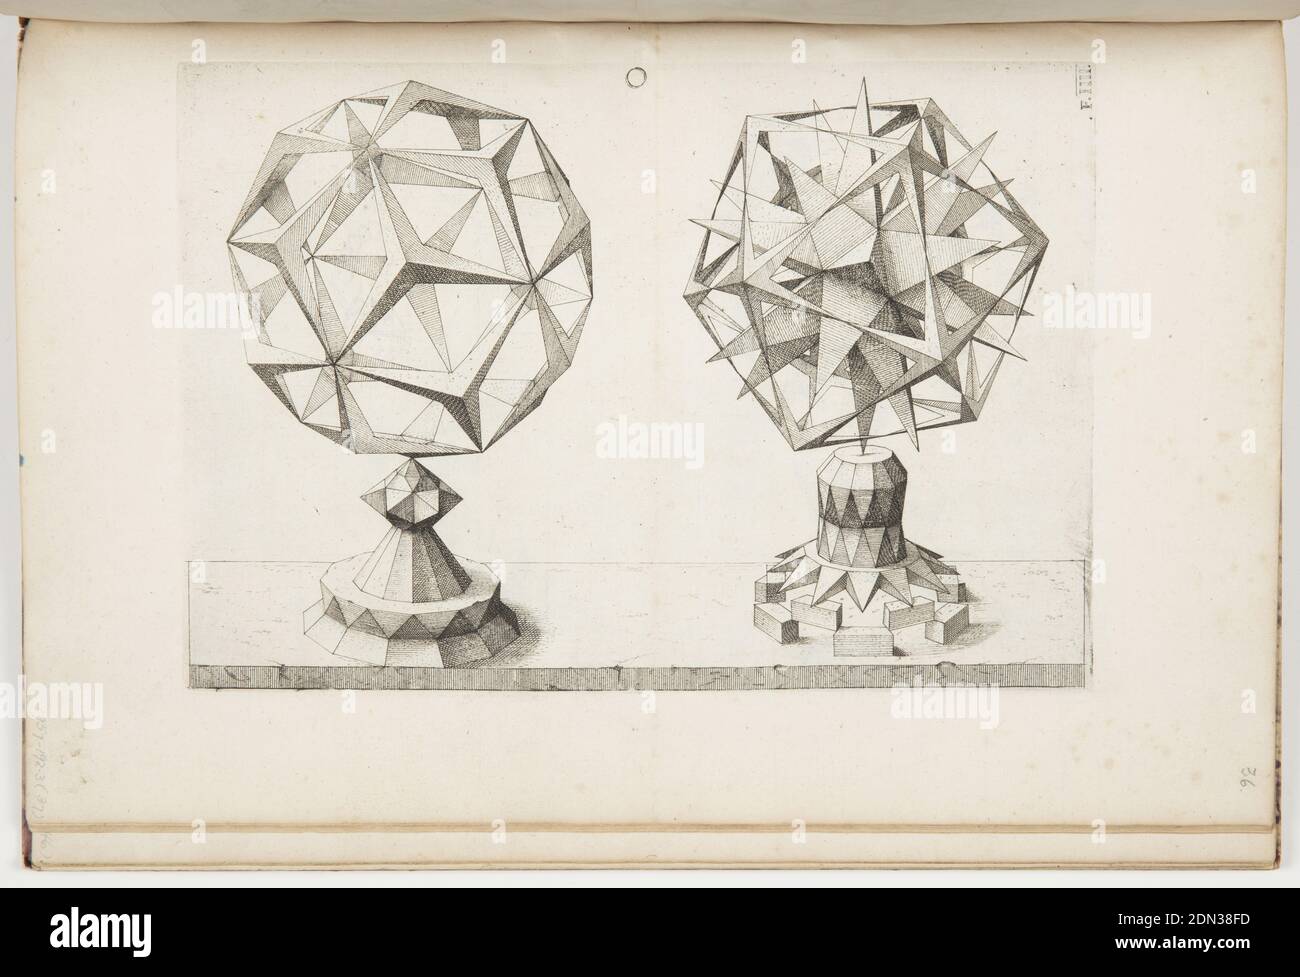 Plate O, F.IIII, Rhombentrikontaeder und Ikosaeder (Rhombic Triacontrahedron and Icosahedron), Perspectiva Corporum Regularium (Perspective of the Regular Bodies), Wenzel Jamnitzer, German, 1508–1585, Jost Amman, Swiss, active Germany, 1539–1591, Etching on laid paper, Plate from Jamnitzer's compendium of perspectival geometry, Perspectiva Corporum Regularium (Perspective of the Regular Bodies) showing two polyhedral variants. The book is based on the five Platonic solids or 'regular bodies.', Germany, 1568, models and prototypes, Print Stock Photo